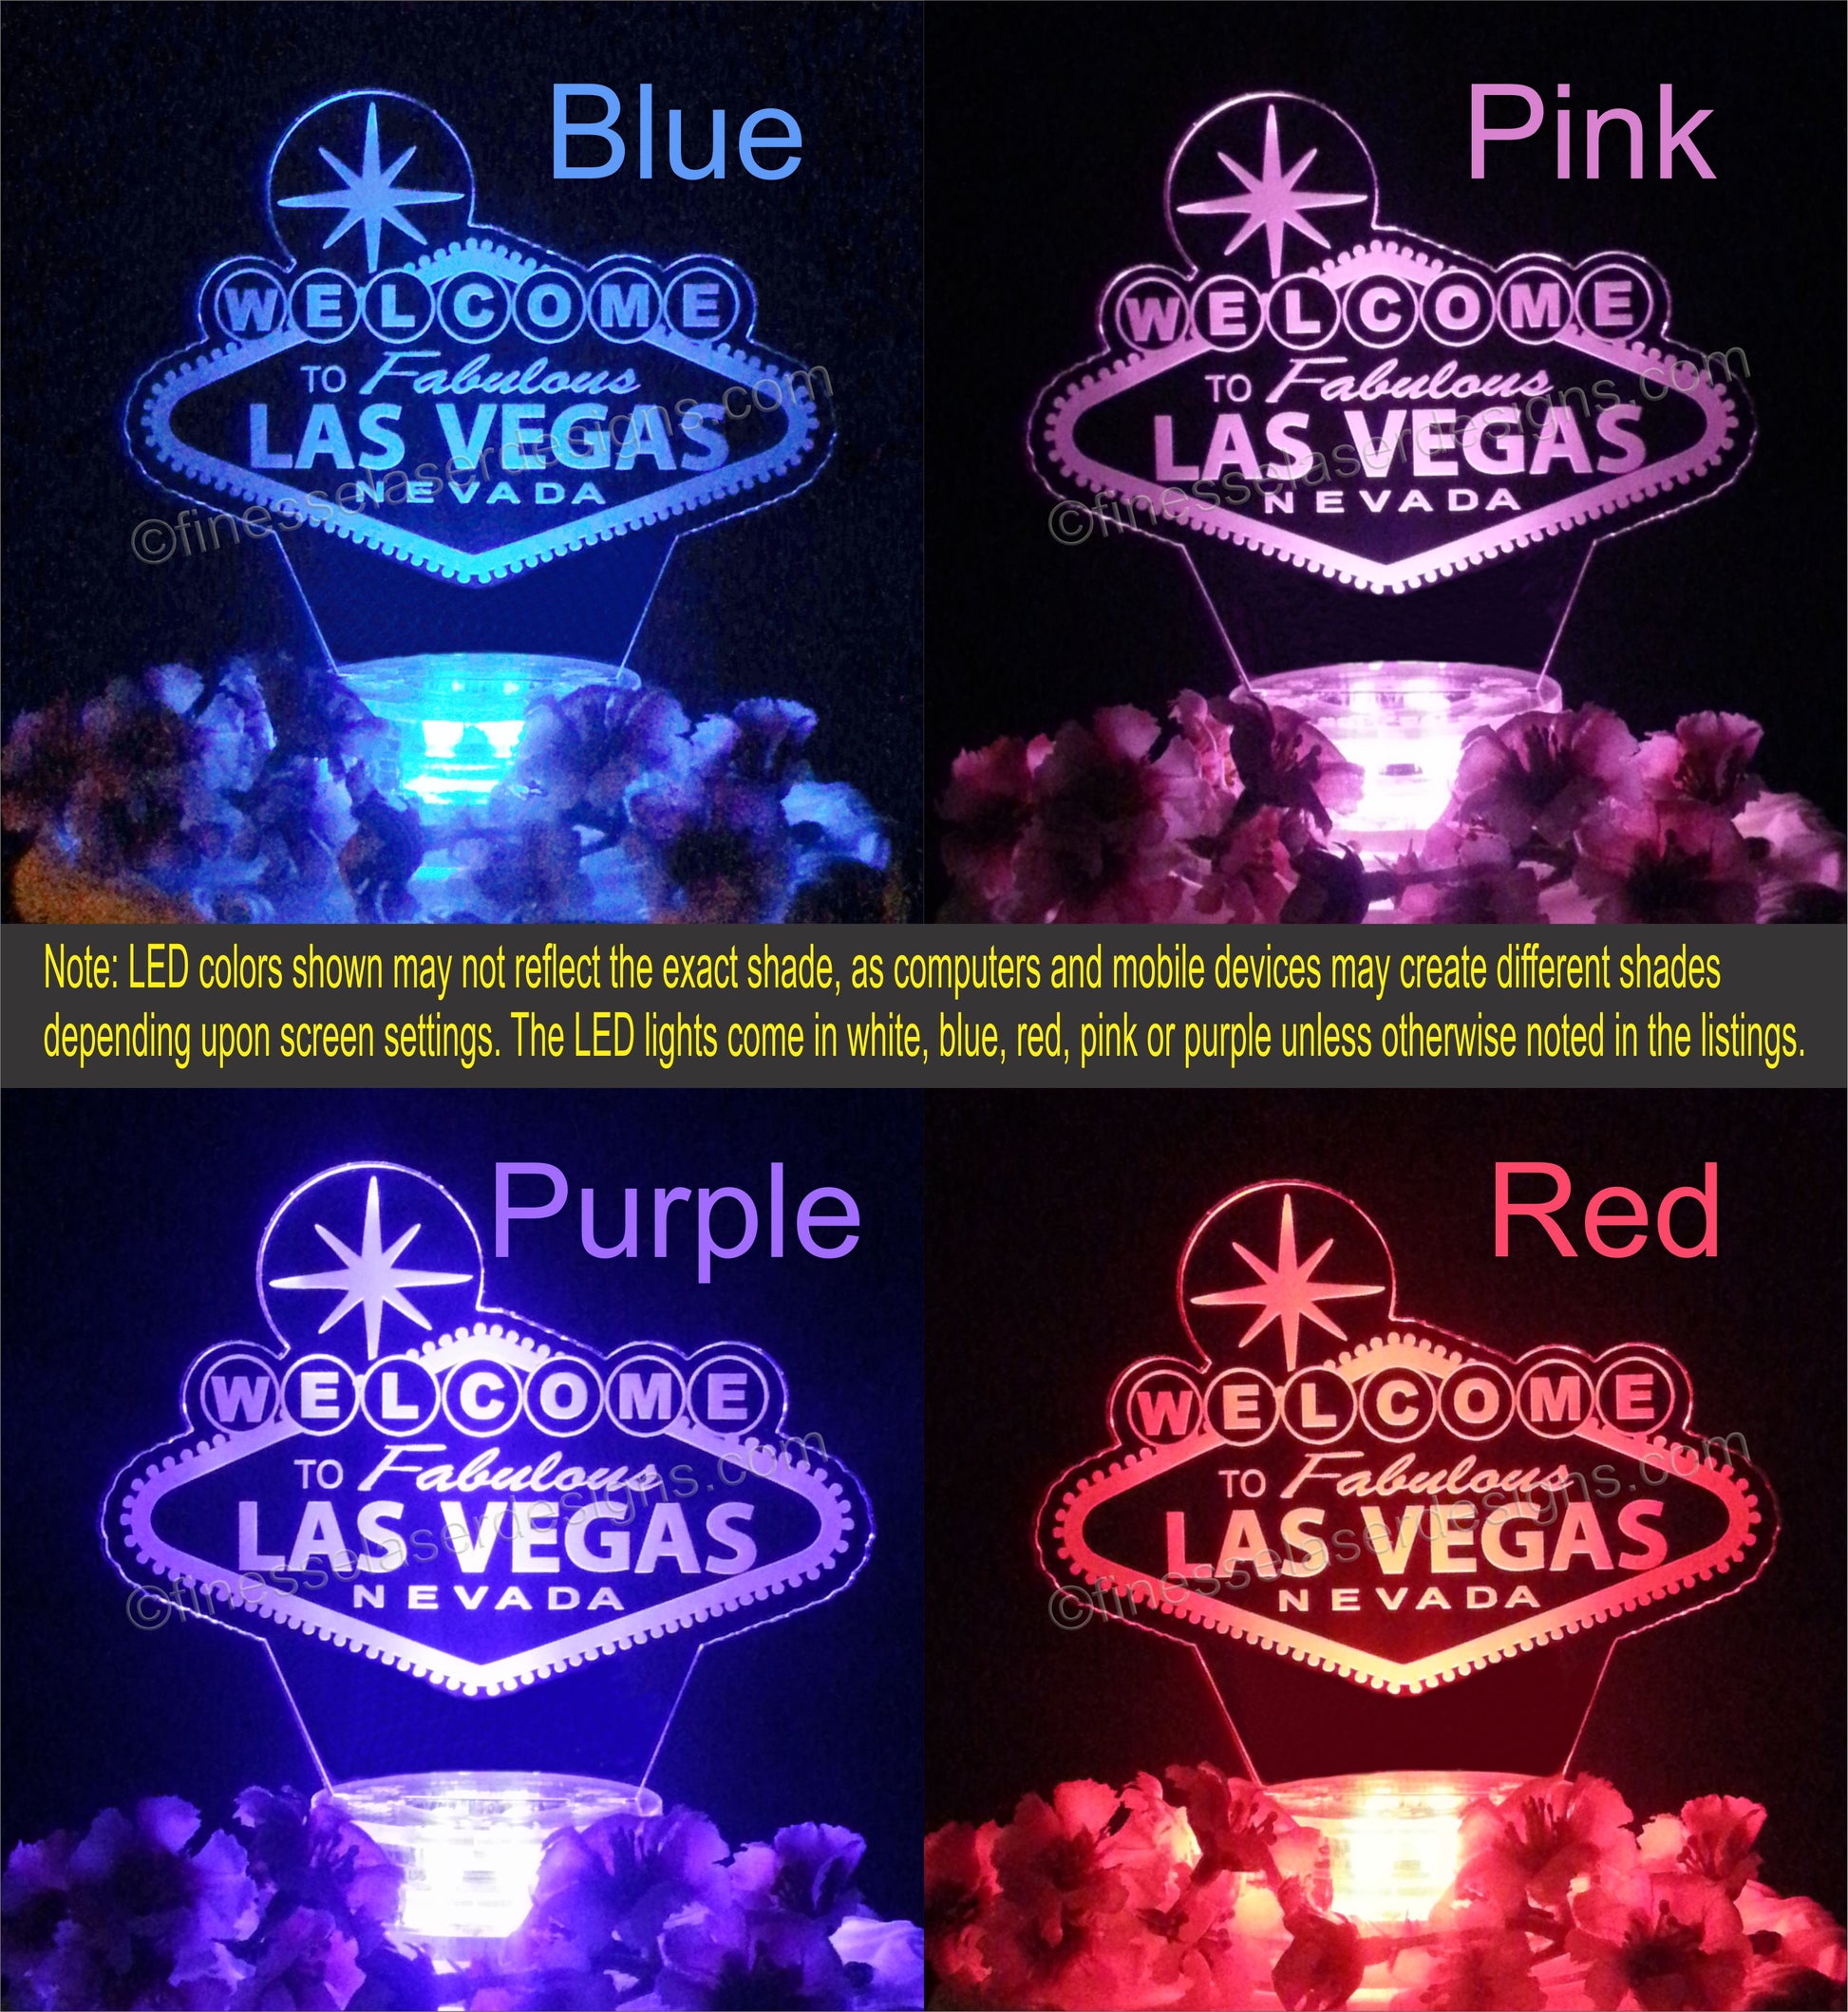 LIghte Welcome to Las Vegas cake topper shown in blue, pink, purple and red lights